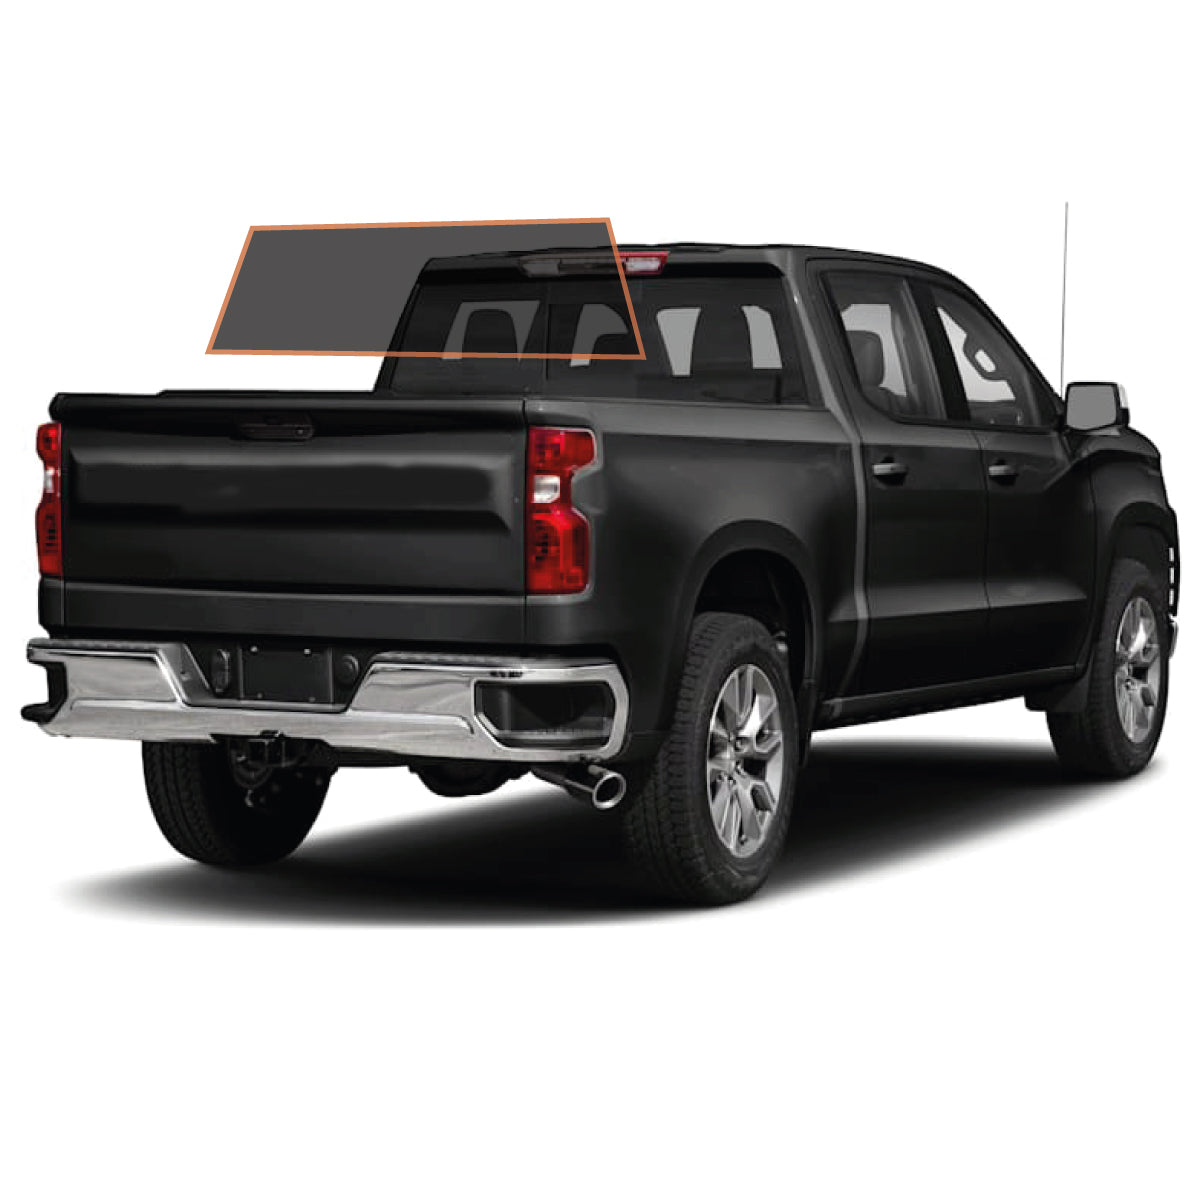 Pre Cut Tint Kit For Any 4 Door Truck—Front Windows